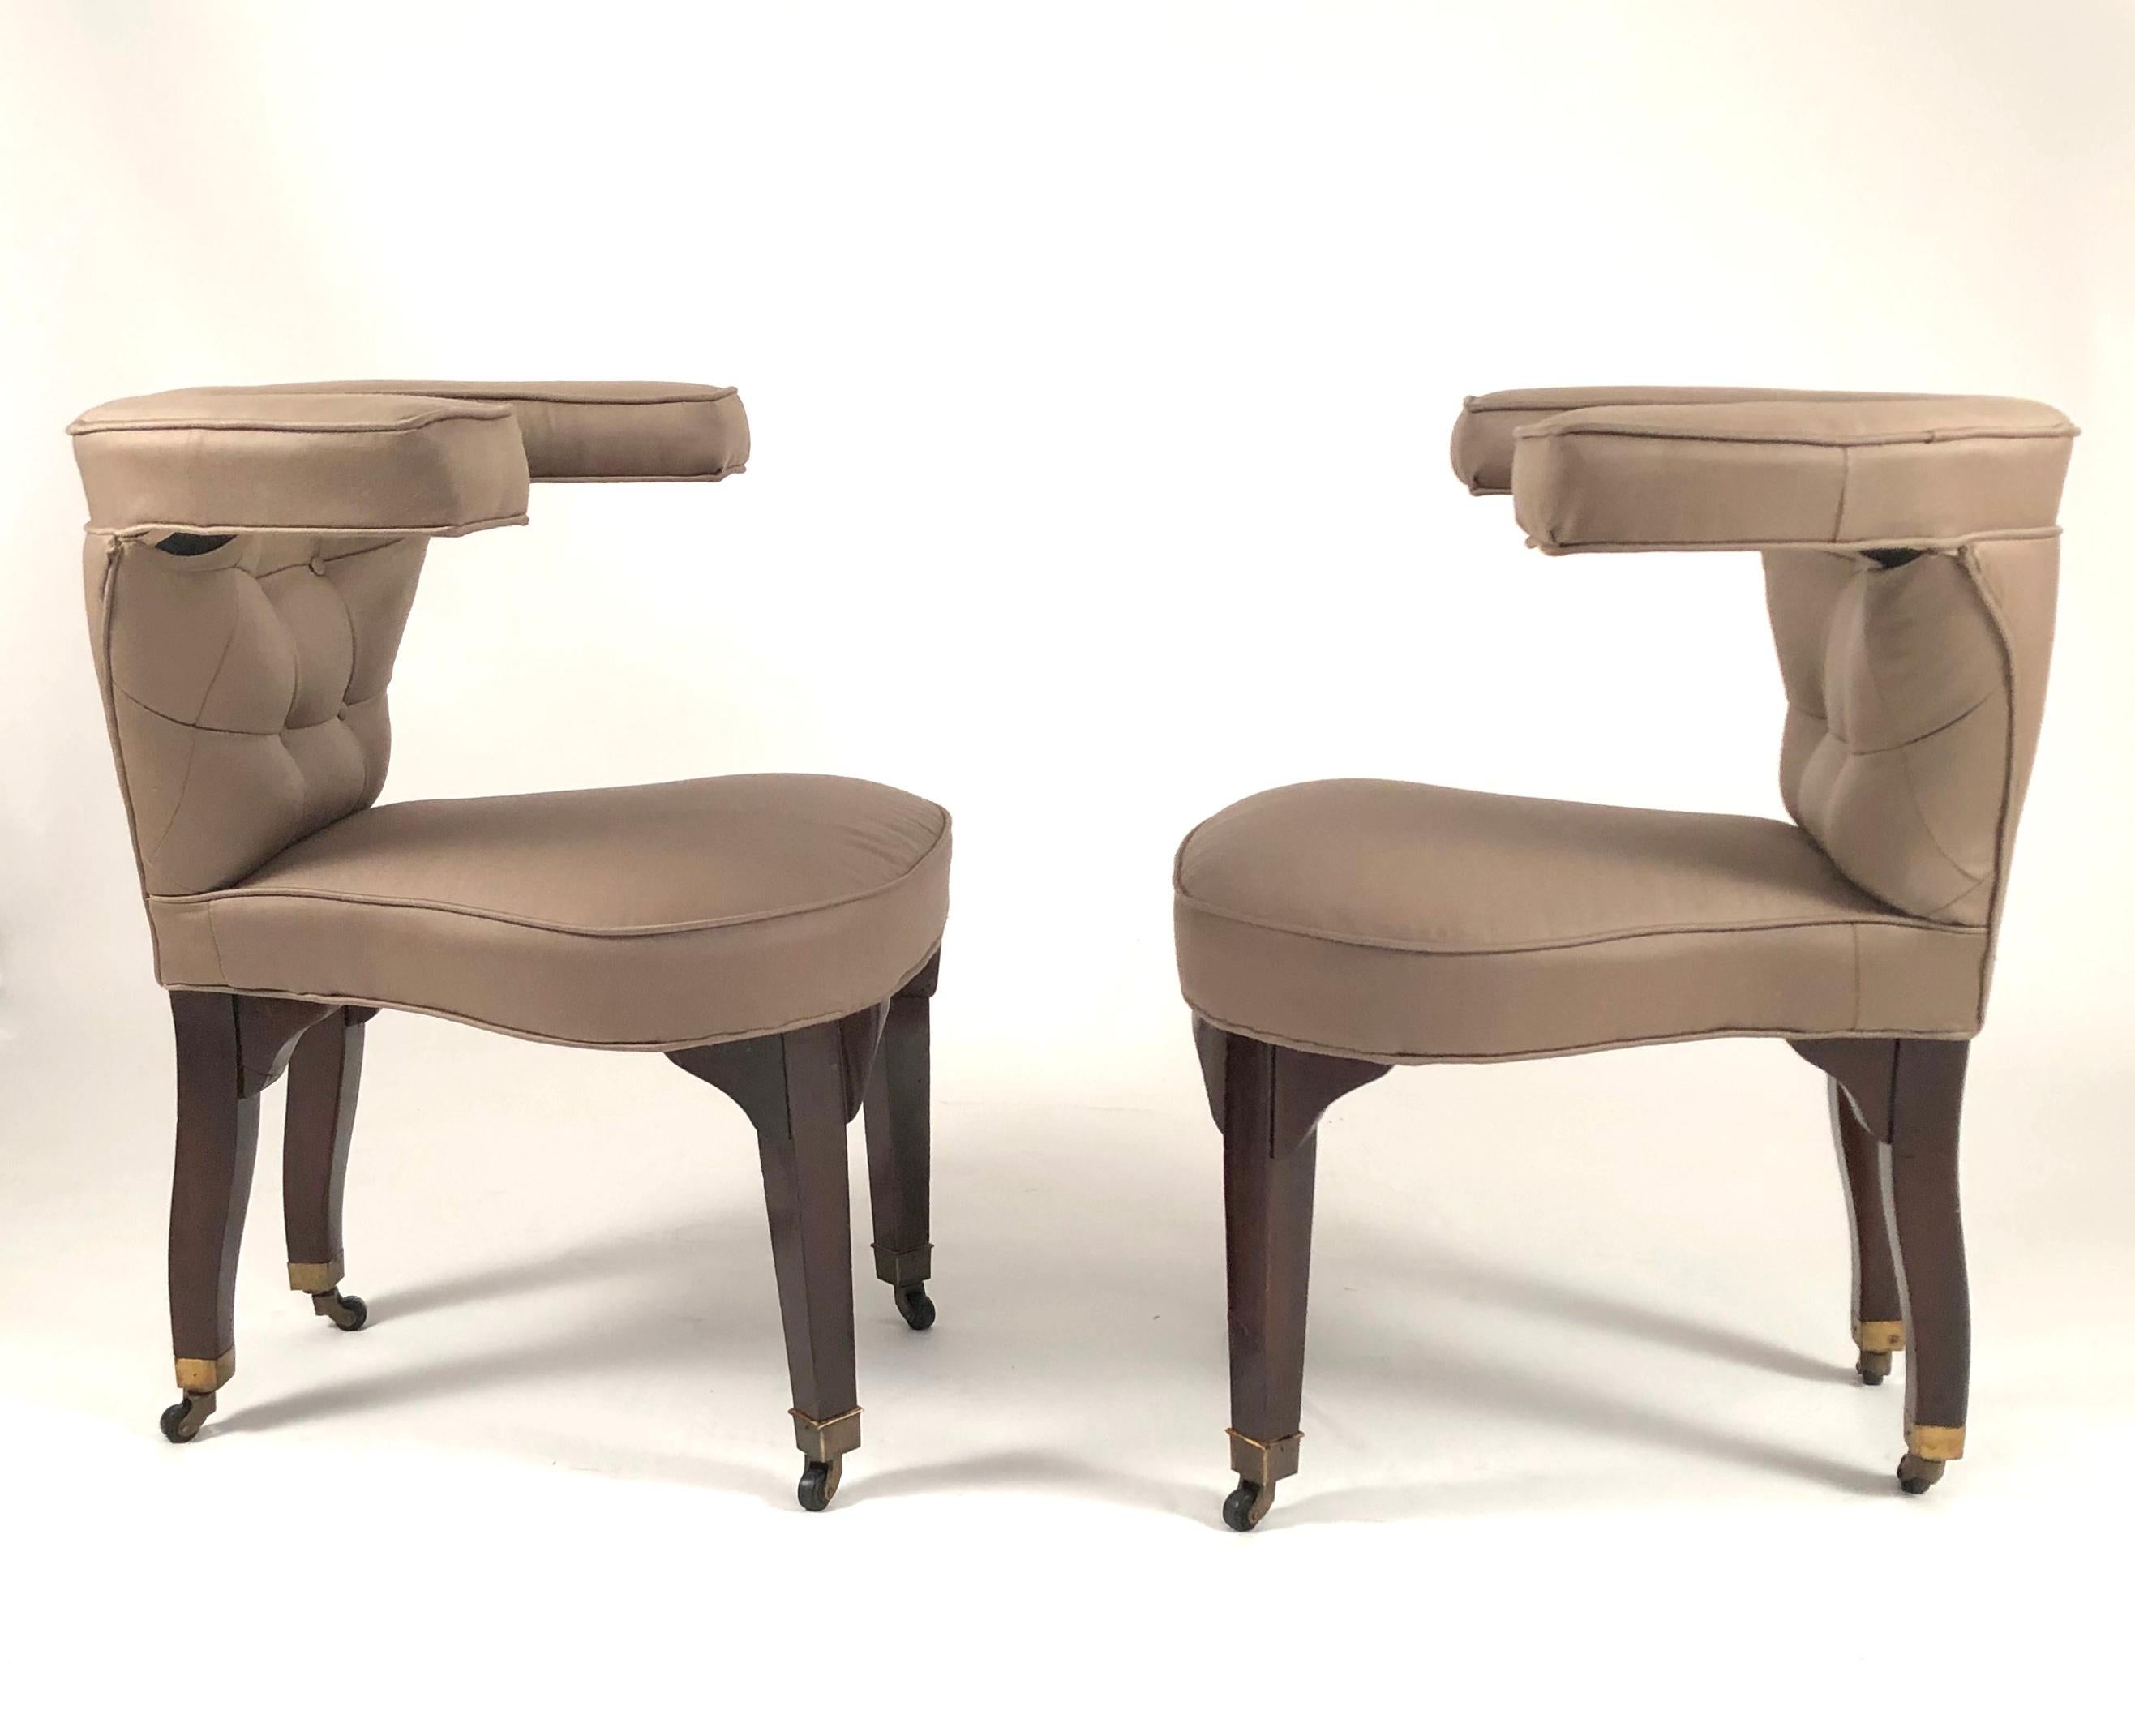 A pair of Edward Wormley designed cock fighting chairs made by Dunbar, newly upholstered in a khaki colored heavy weight twill, with button tufted backs and mahogany legs with brass caps and casters. This form is after a George III library chair,